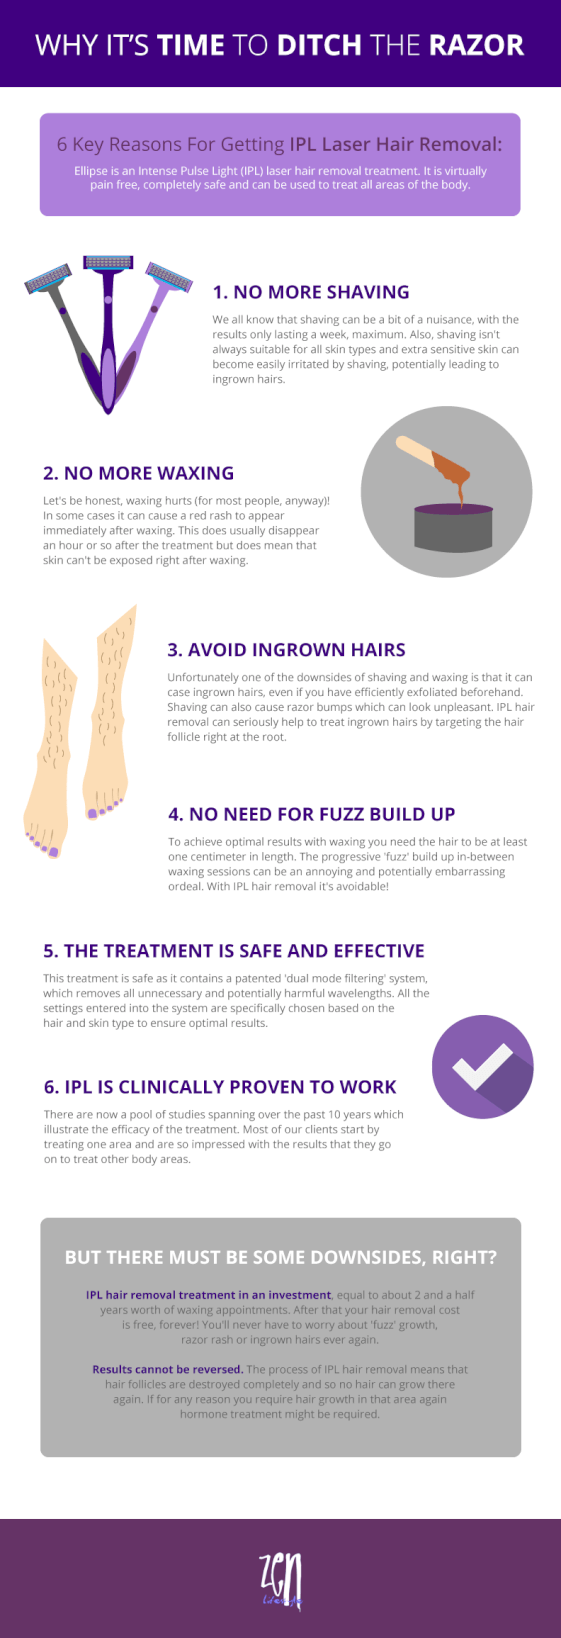 IPL Hair Removal Infographic